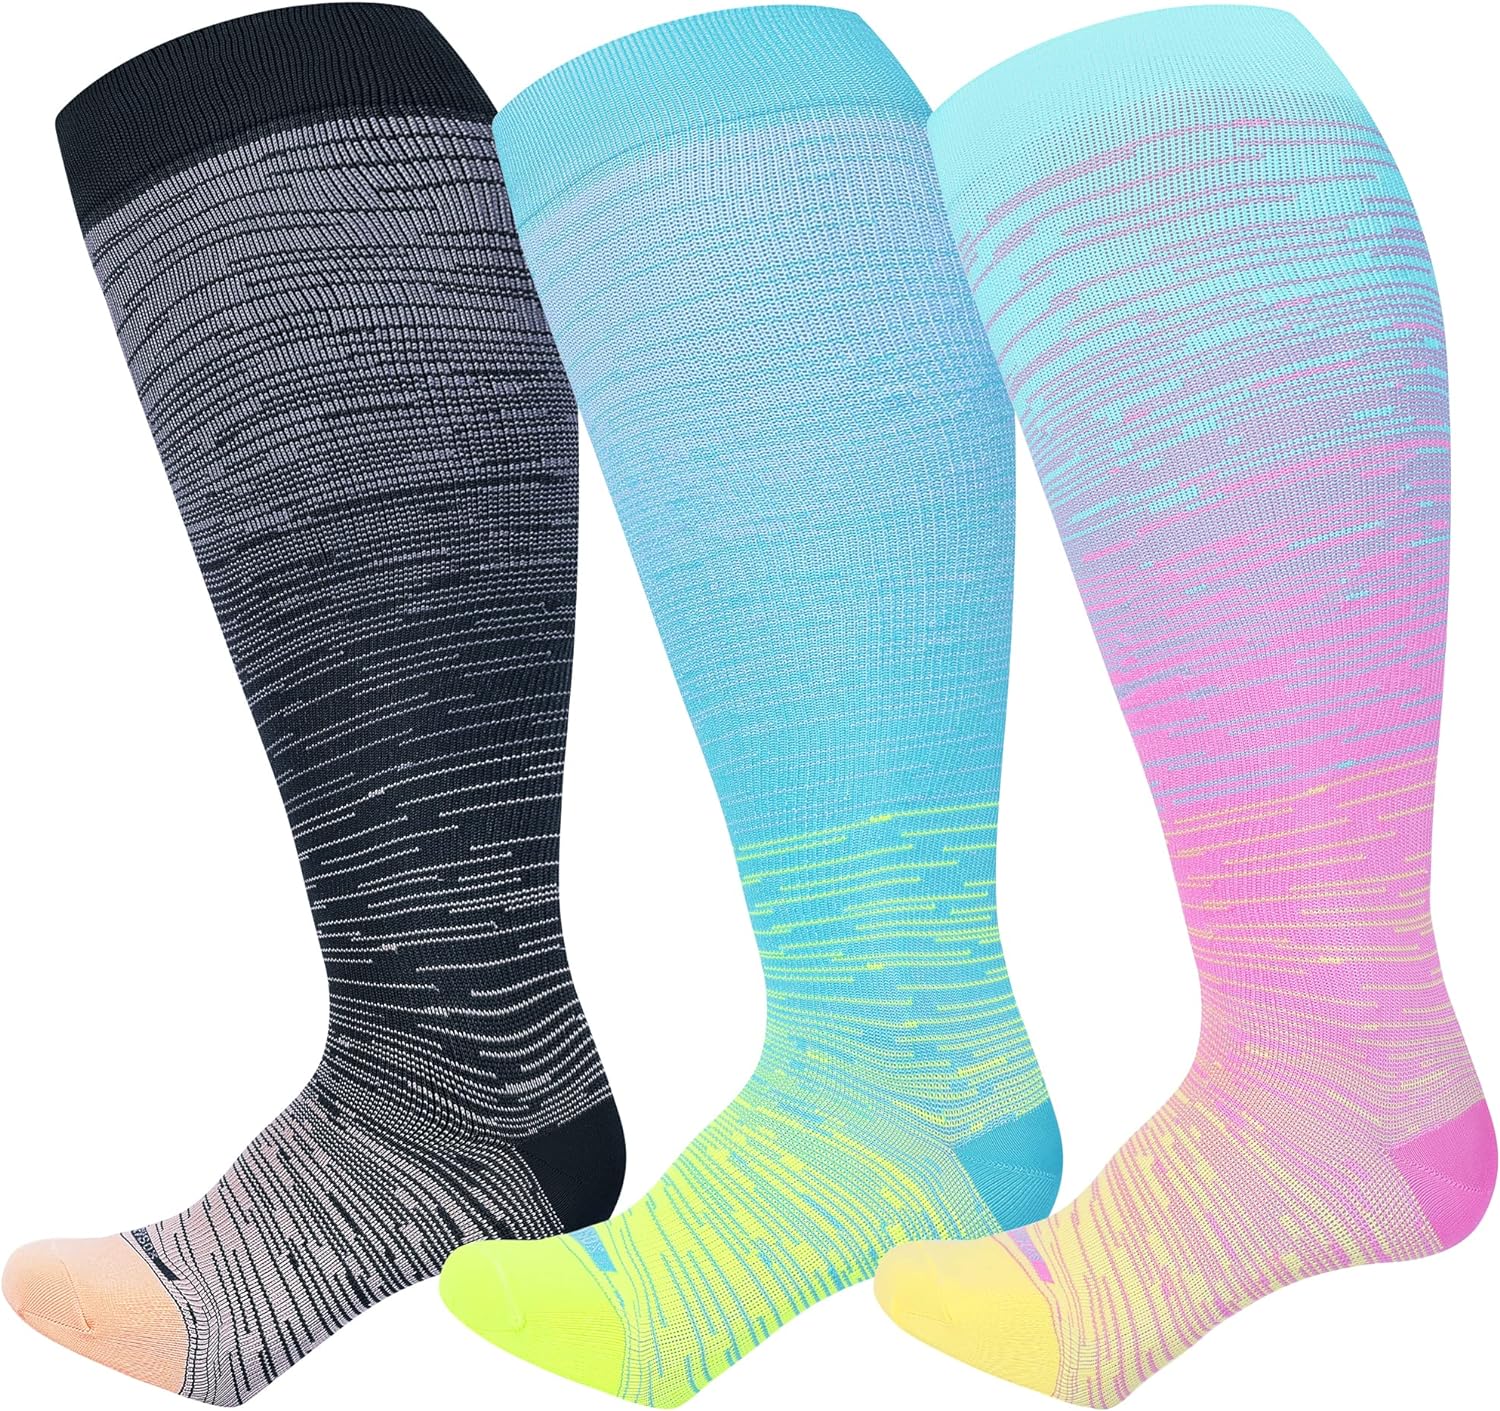 LEVSOX Plus Size Compression Socks for Women Men Wide Calf Extra Large 15-20 mmHg Knee High Support Sock for Nurses Pregnant Travel